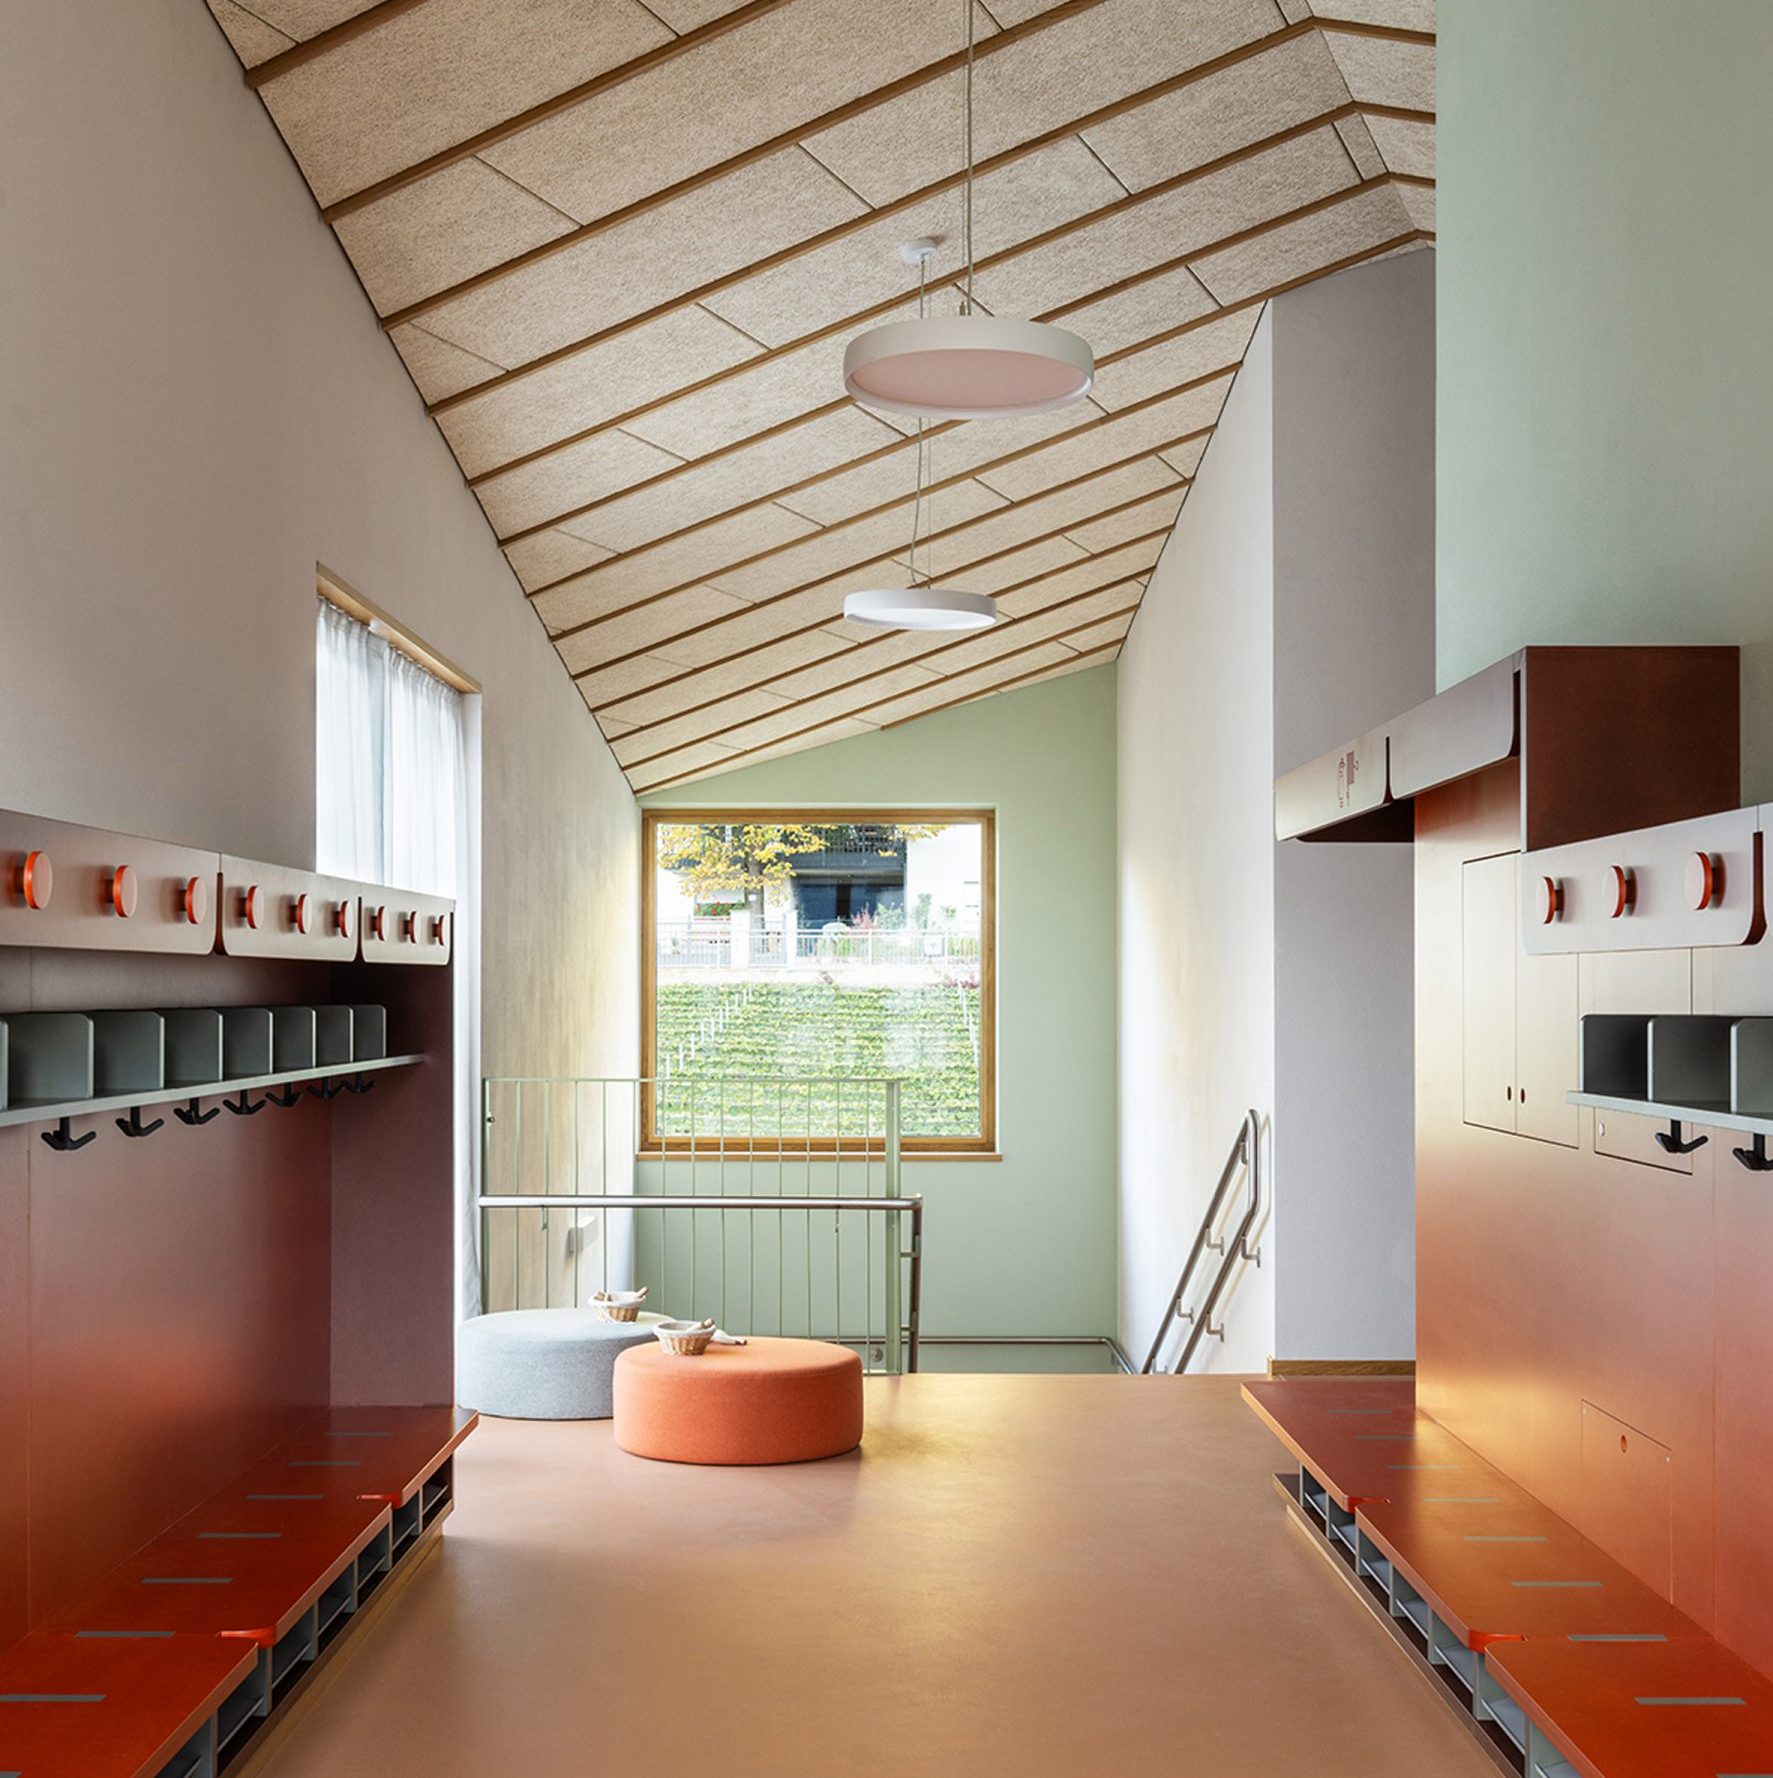 Interior of Tartan School featuring red-brick resin flooring, wooden ceilings and MDF furniture